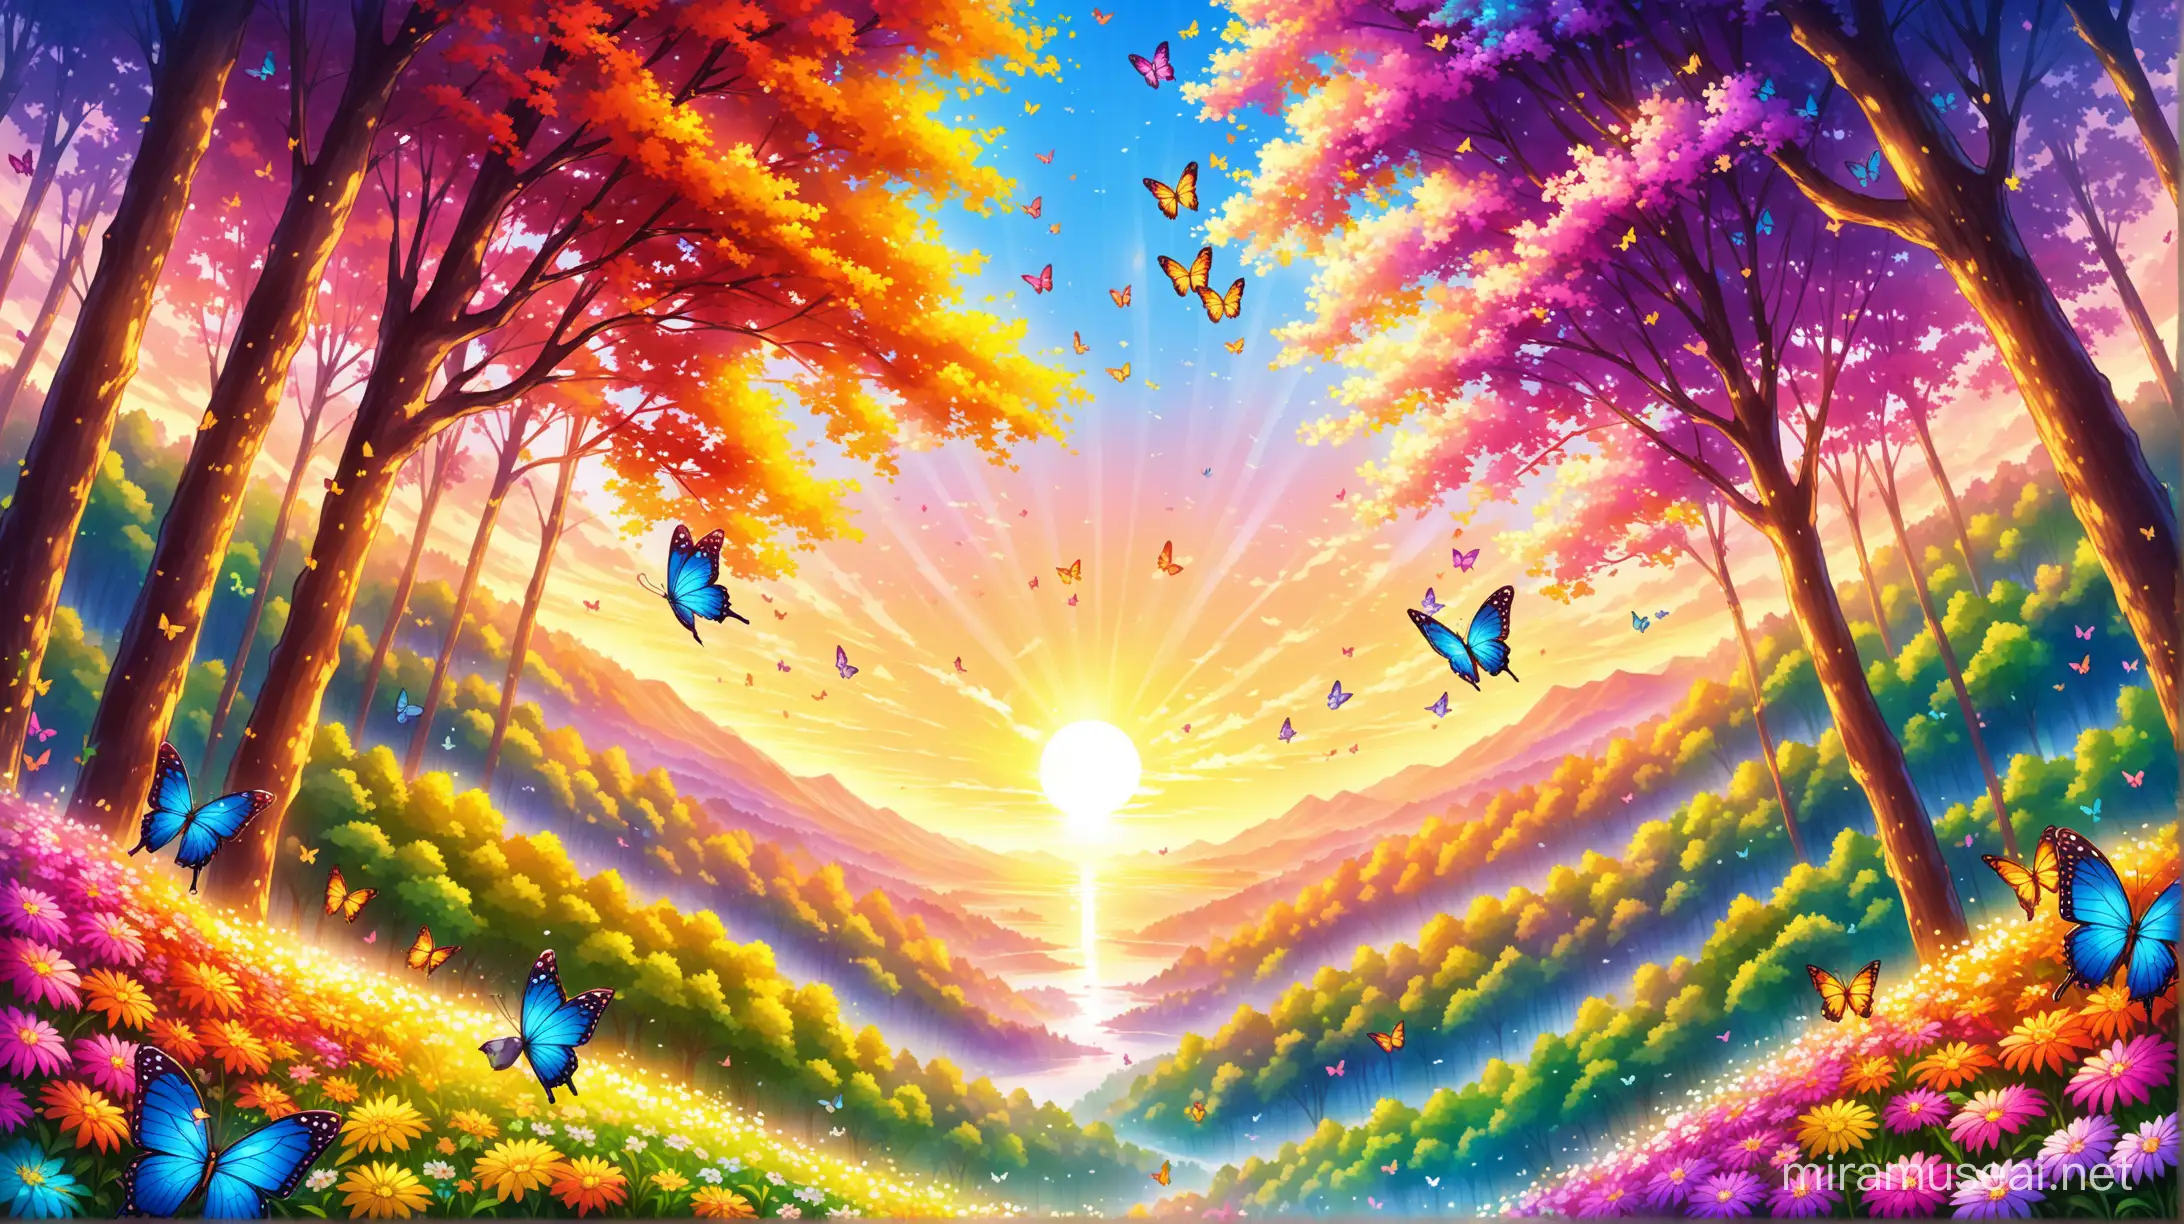 Tranquil Forest Sunrise Vibrant Butterflies Flowers and Diverse Trees